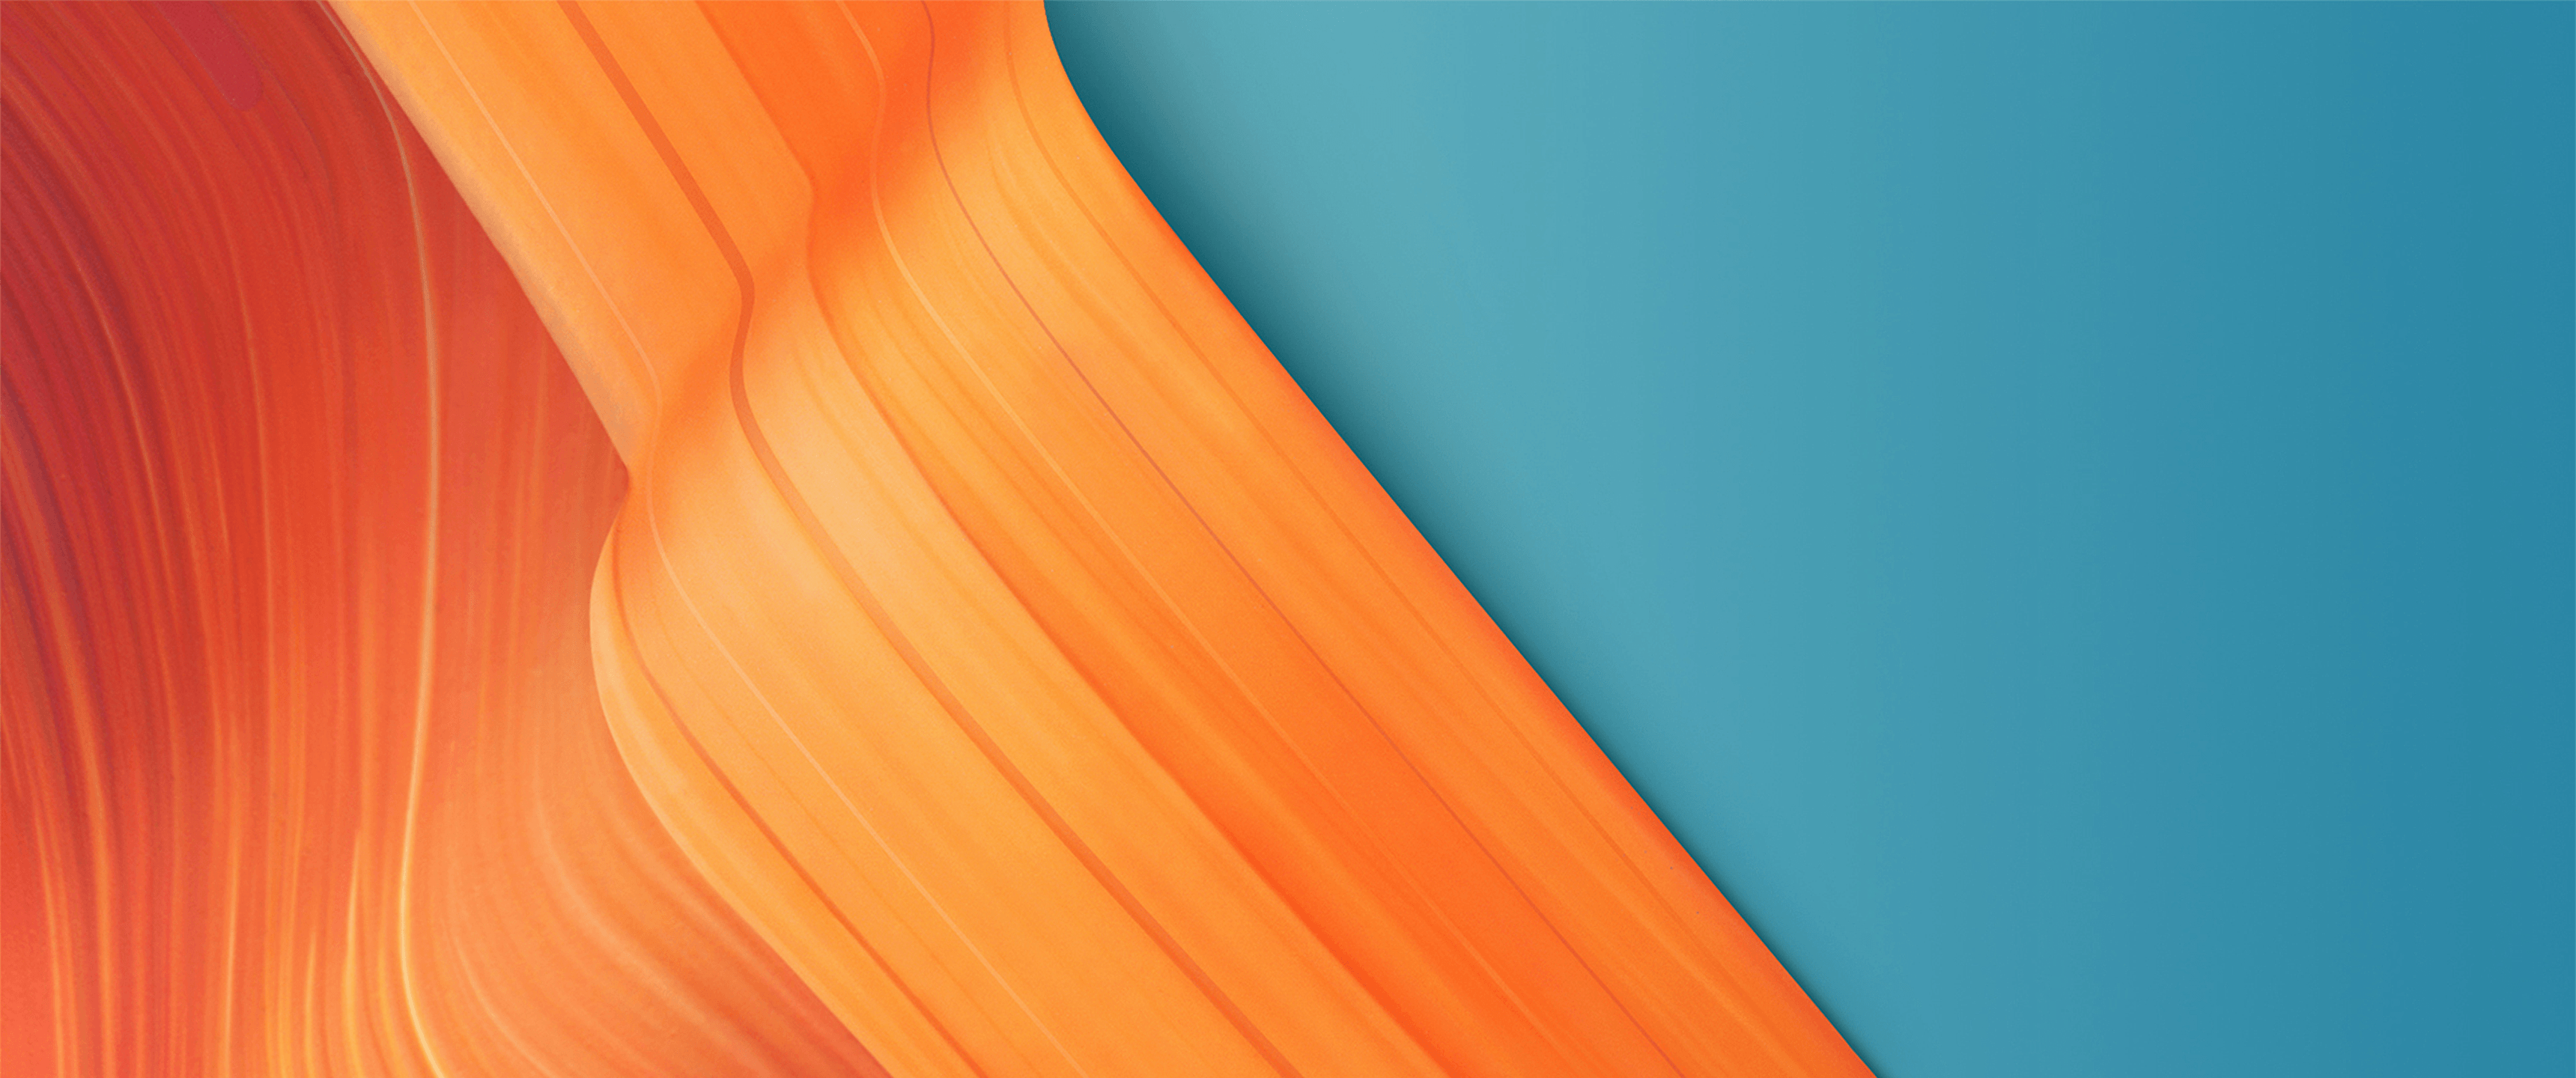 HD wallpaper red greenand black wallpaper orange teal and gray  background  Wallpaper Flare